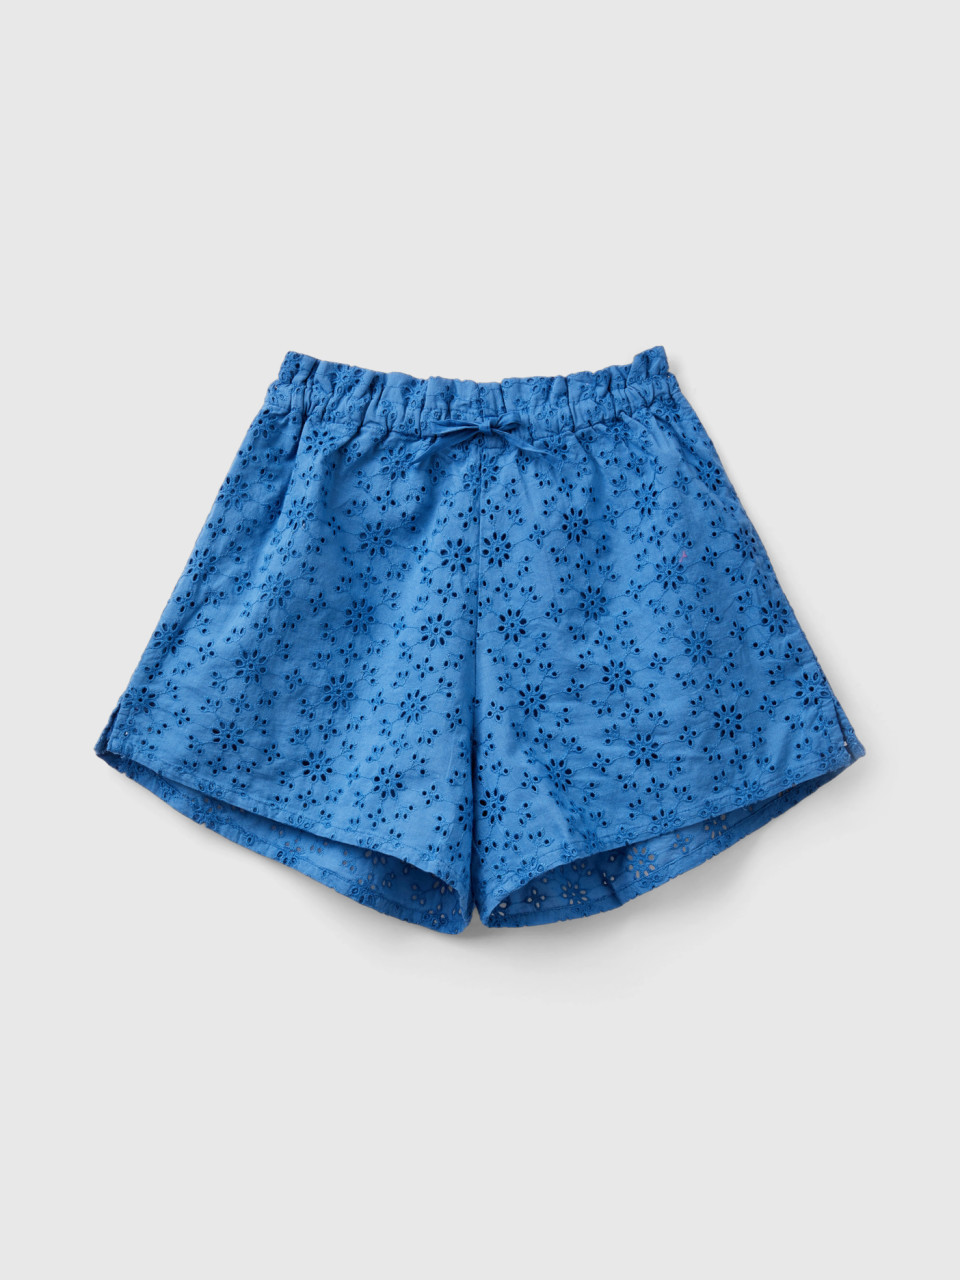 Benetton, Shorts With Broderie Anglaise Embroidery, Blue, Kids